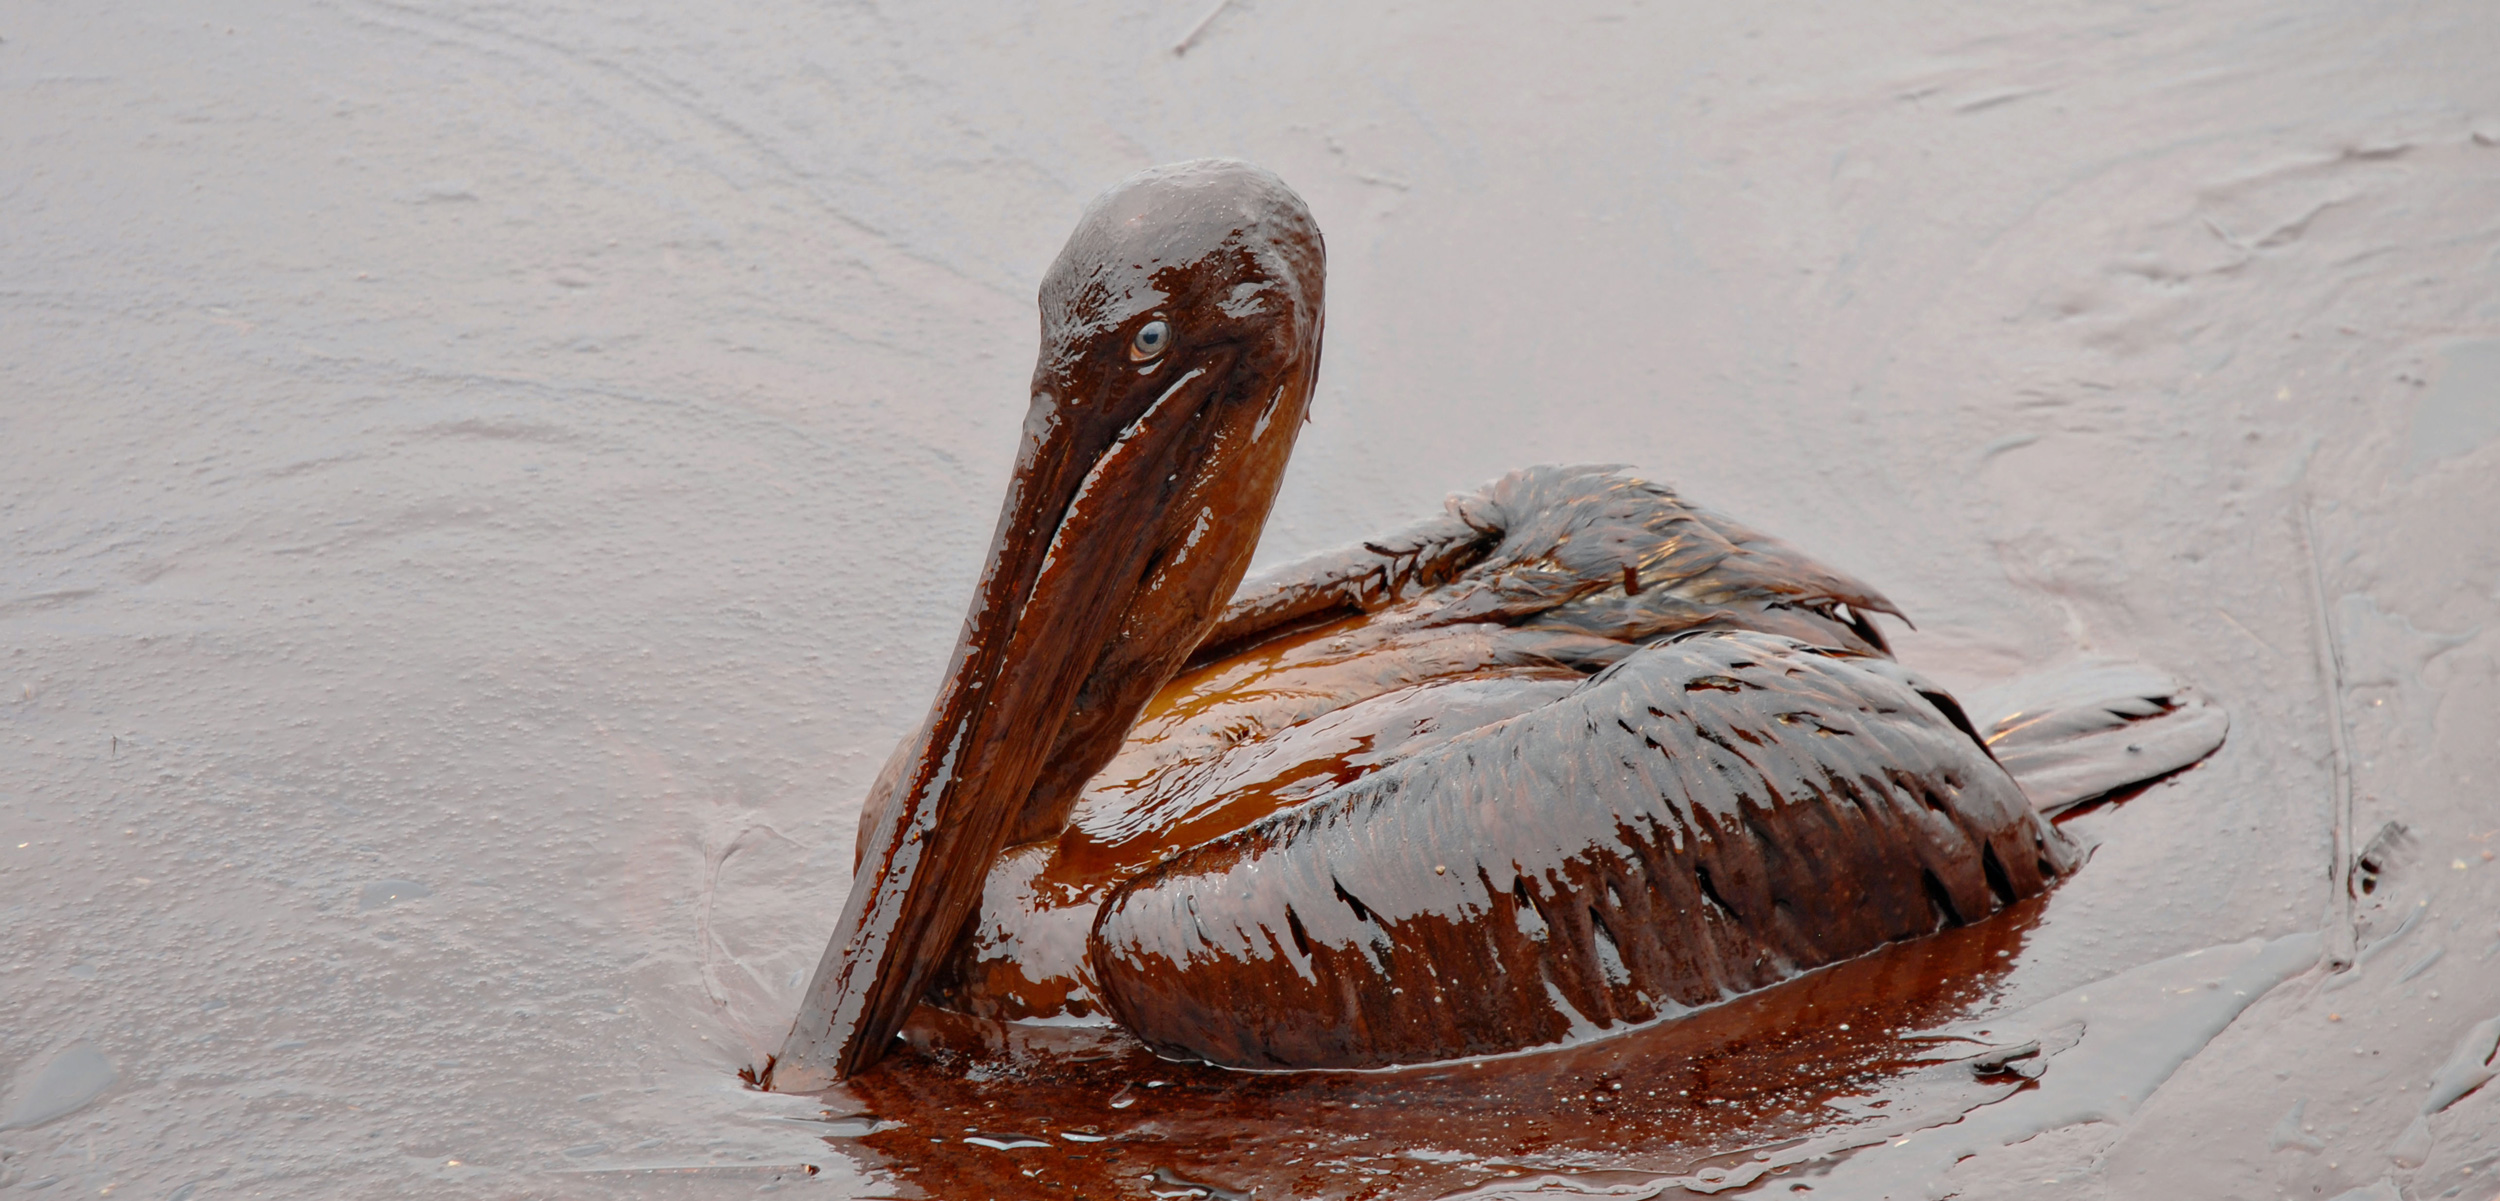 After the Deepwater Horizon oil blowout in 2010, rescuers rushed to save birds, like this pelican. In the end, it didn’t really matter, most birds died. Photo by Louisiana Governors Office/Alamy Stock Photo